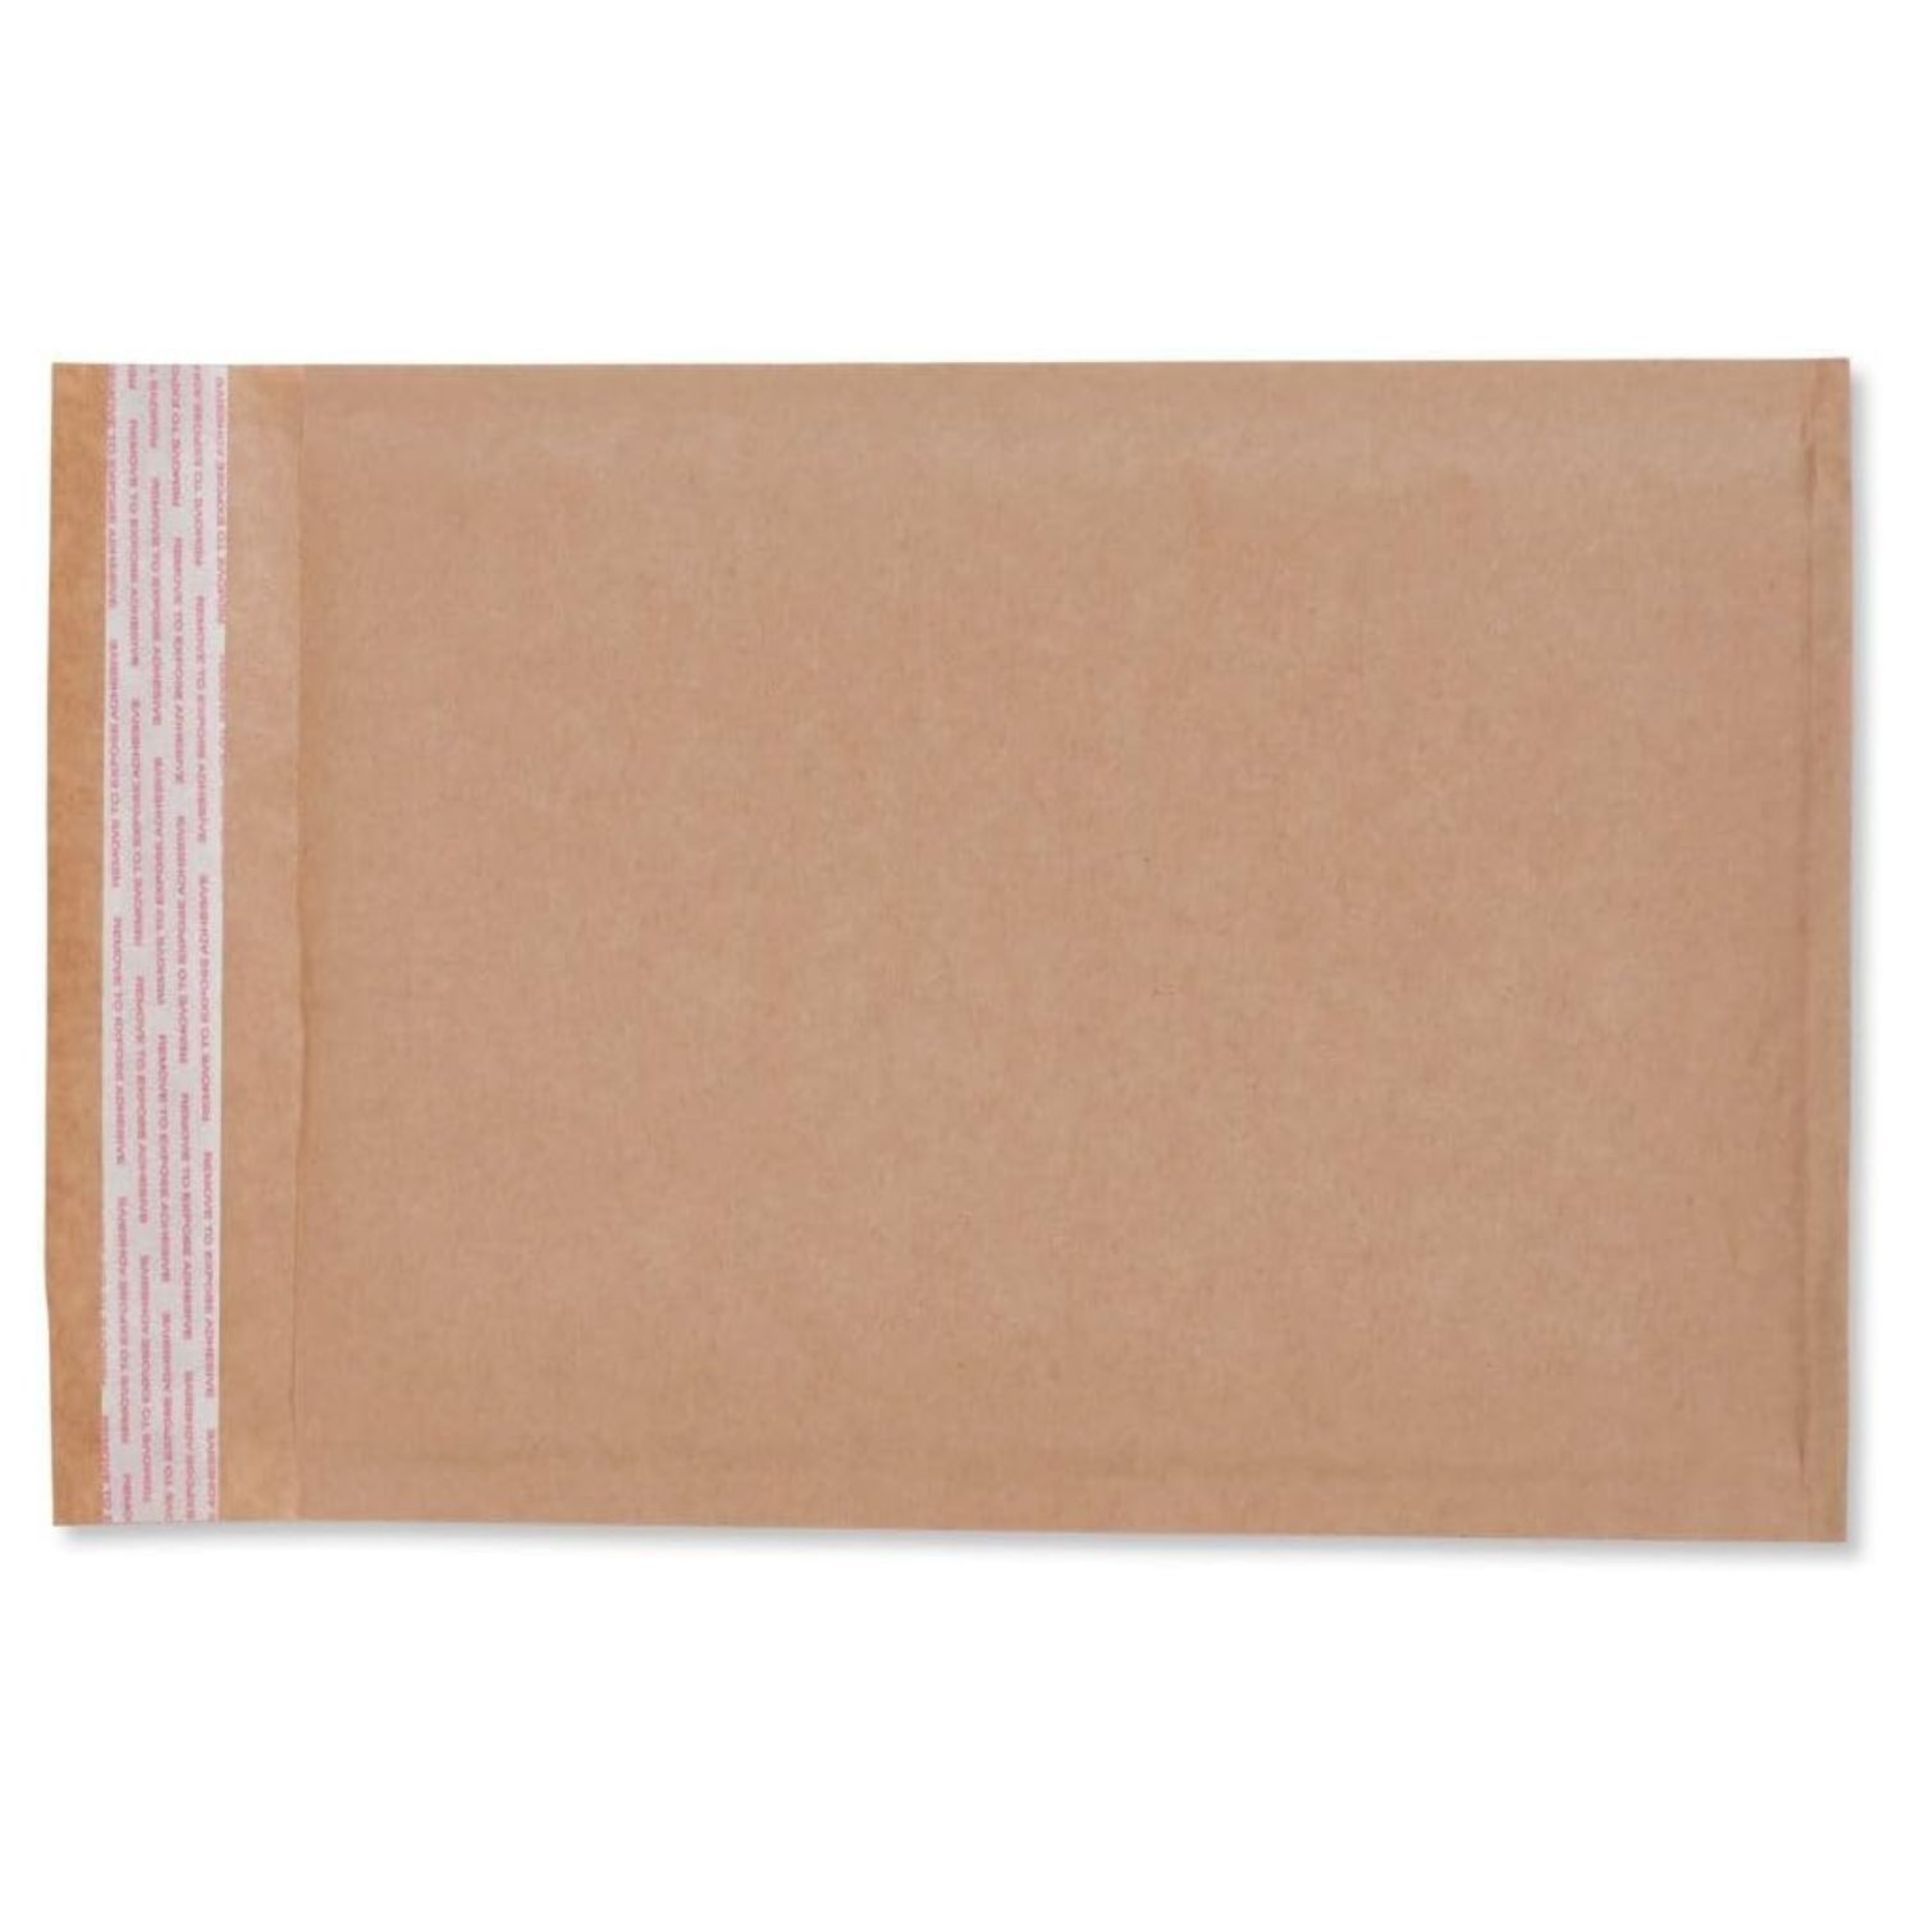 1000 BUBBLE ENVELOPES WITH PEEL AND SEAL TOUGH LIGHT PADDED (170 X 210MM) - Image 4 of 4